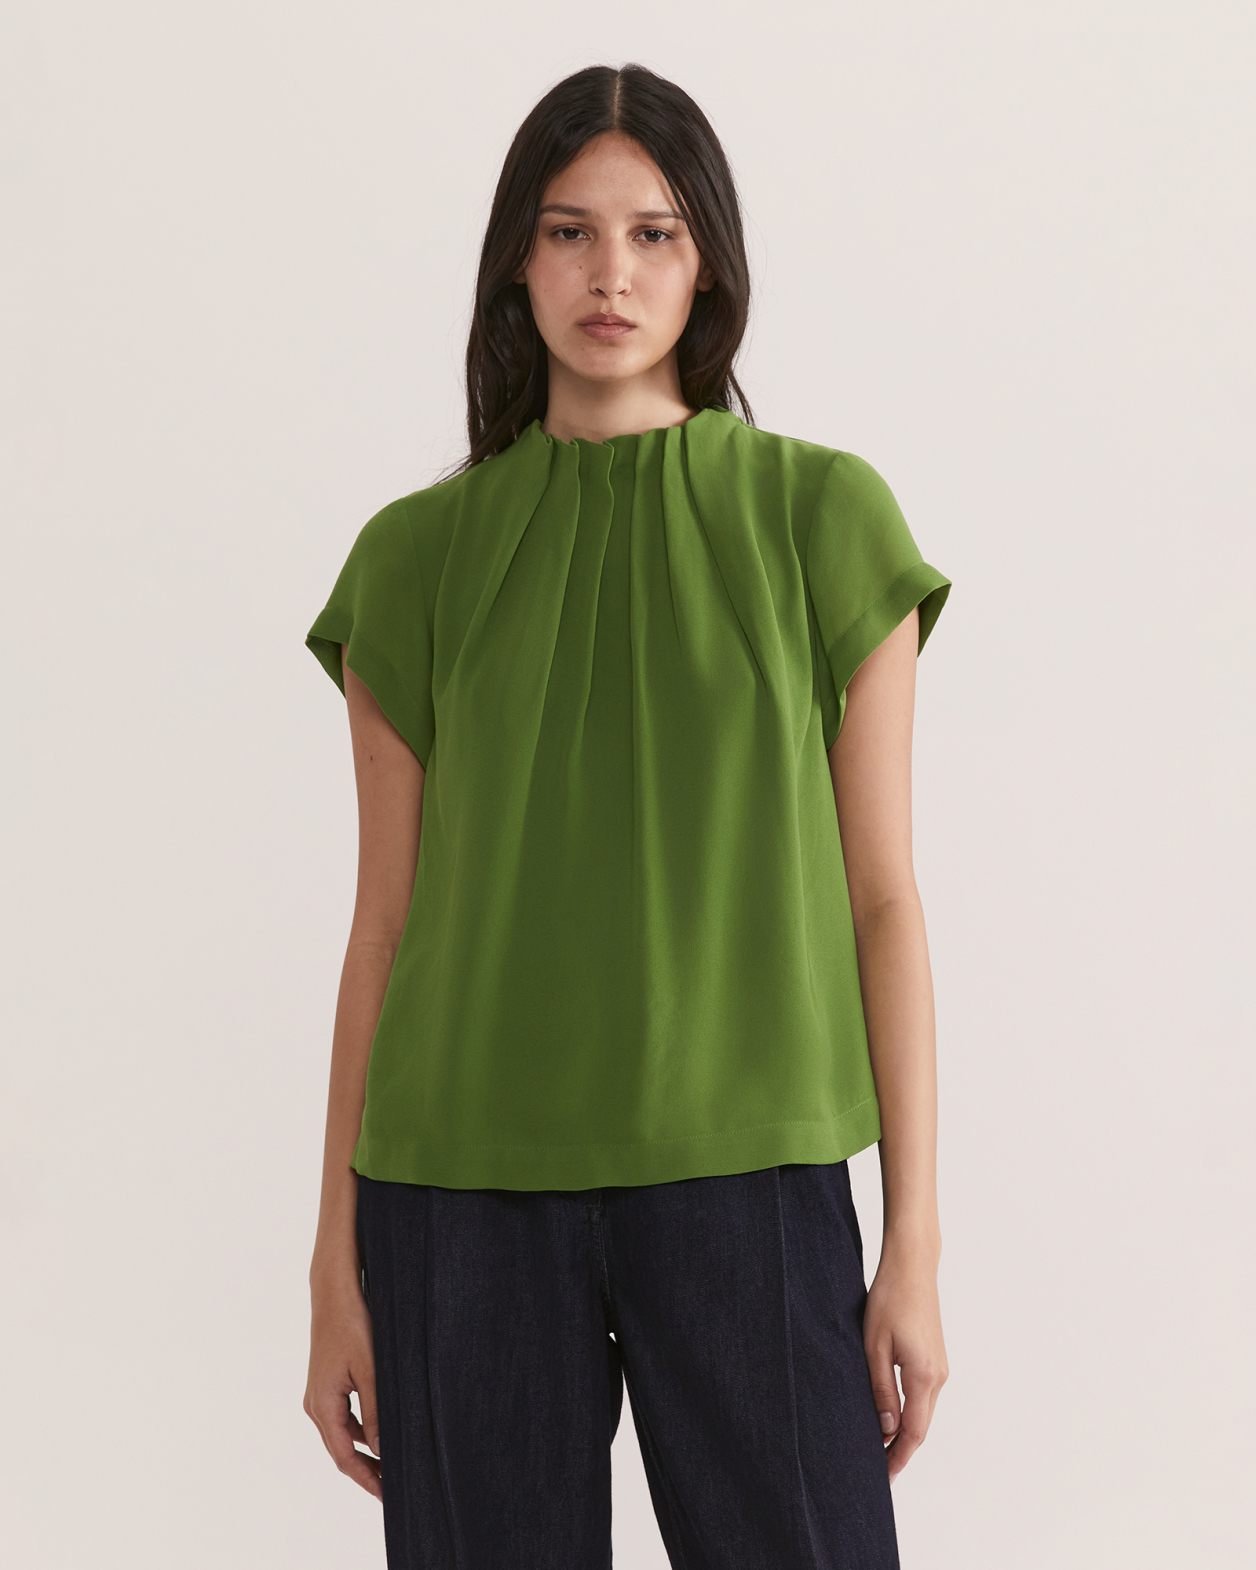 Willa High Neck Short Sleeve Top in PALM